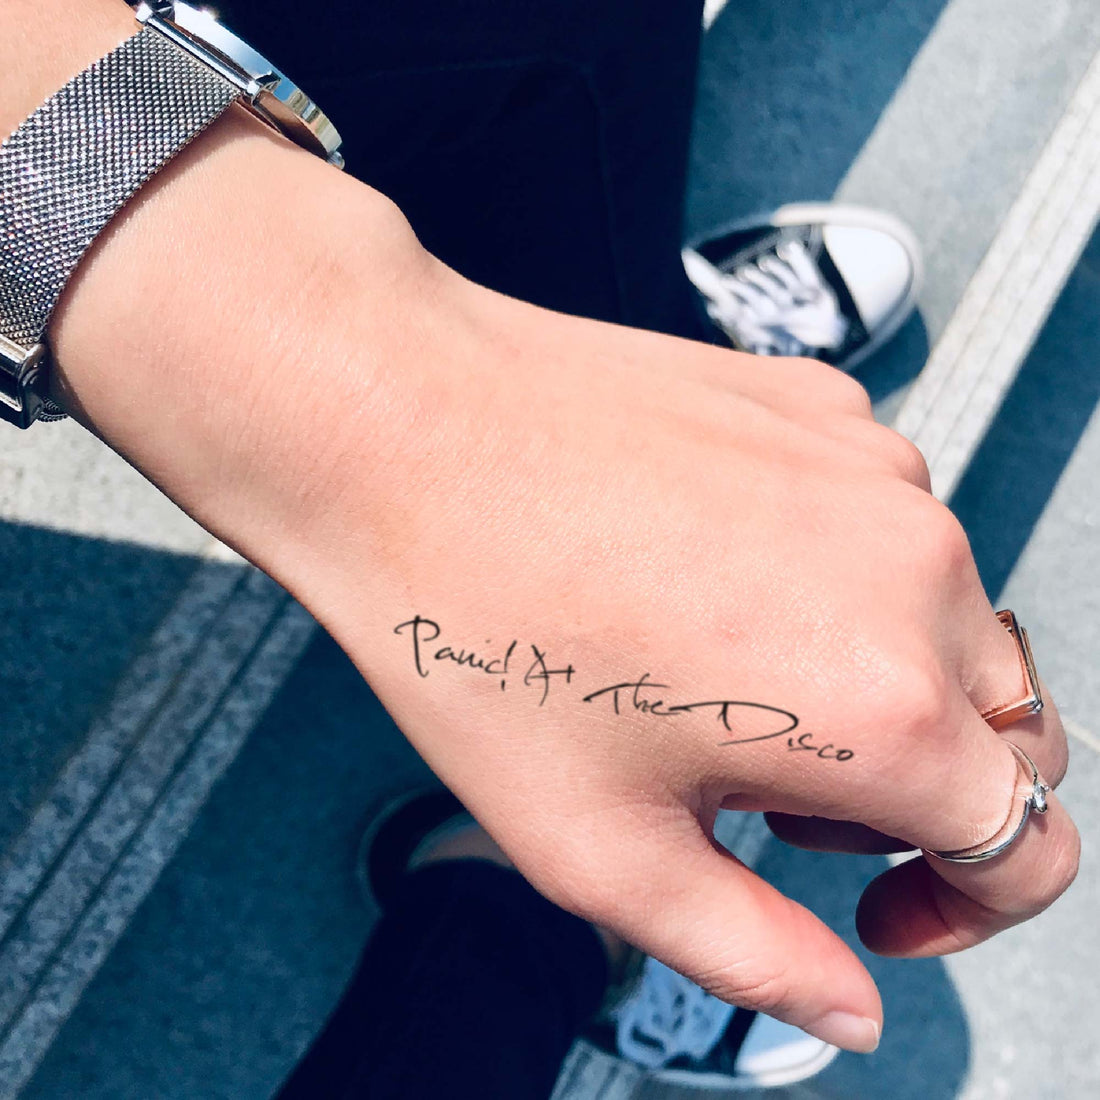 Panic! At The Disco custom temporary tattoo sticker design idea inspiration meanings removal arm wrist hand words font name signature calligraphy lyrics tour concert outfits merch accessory gift souvenir costumes wear dress up code